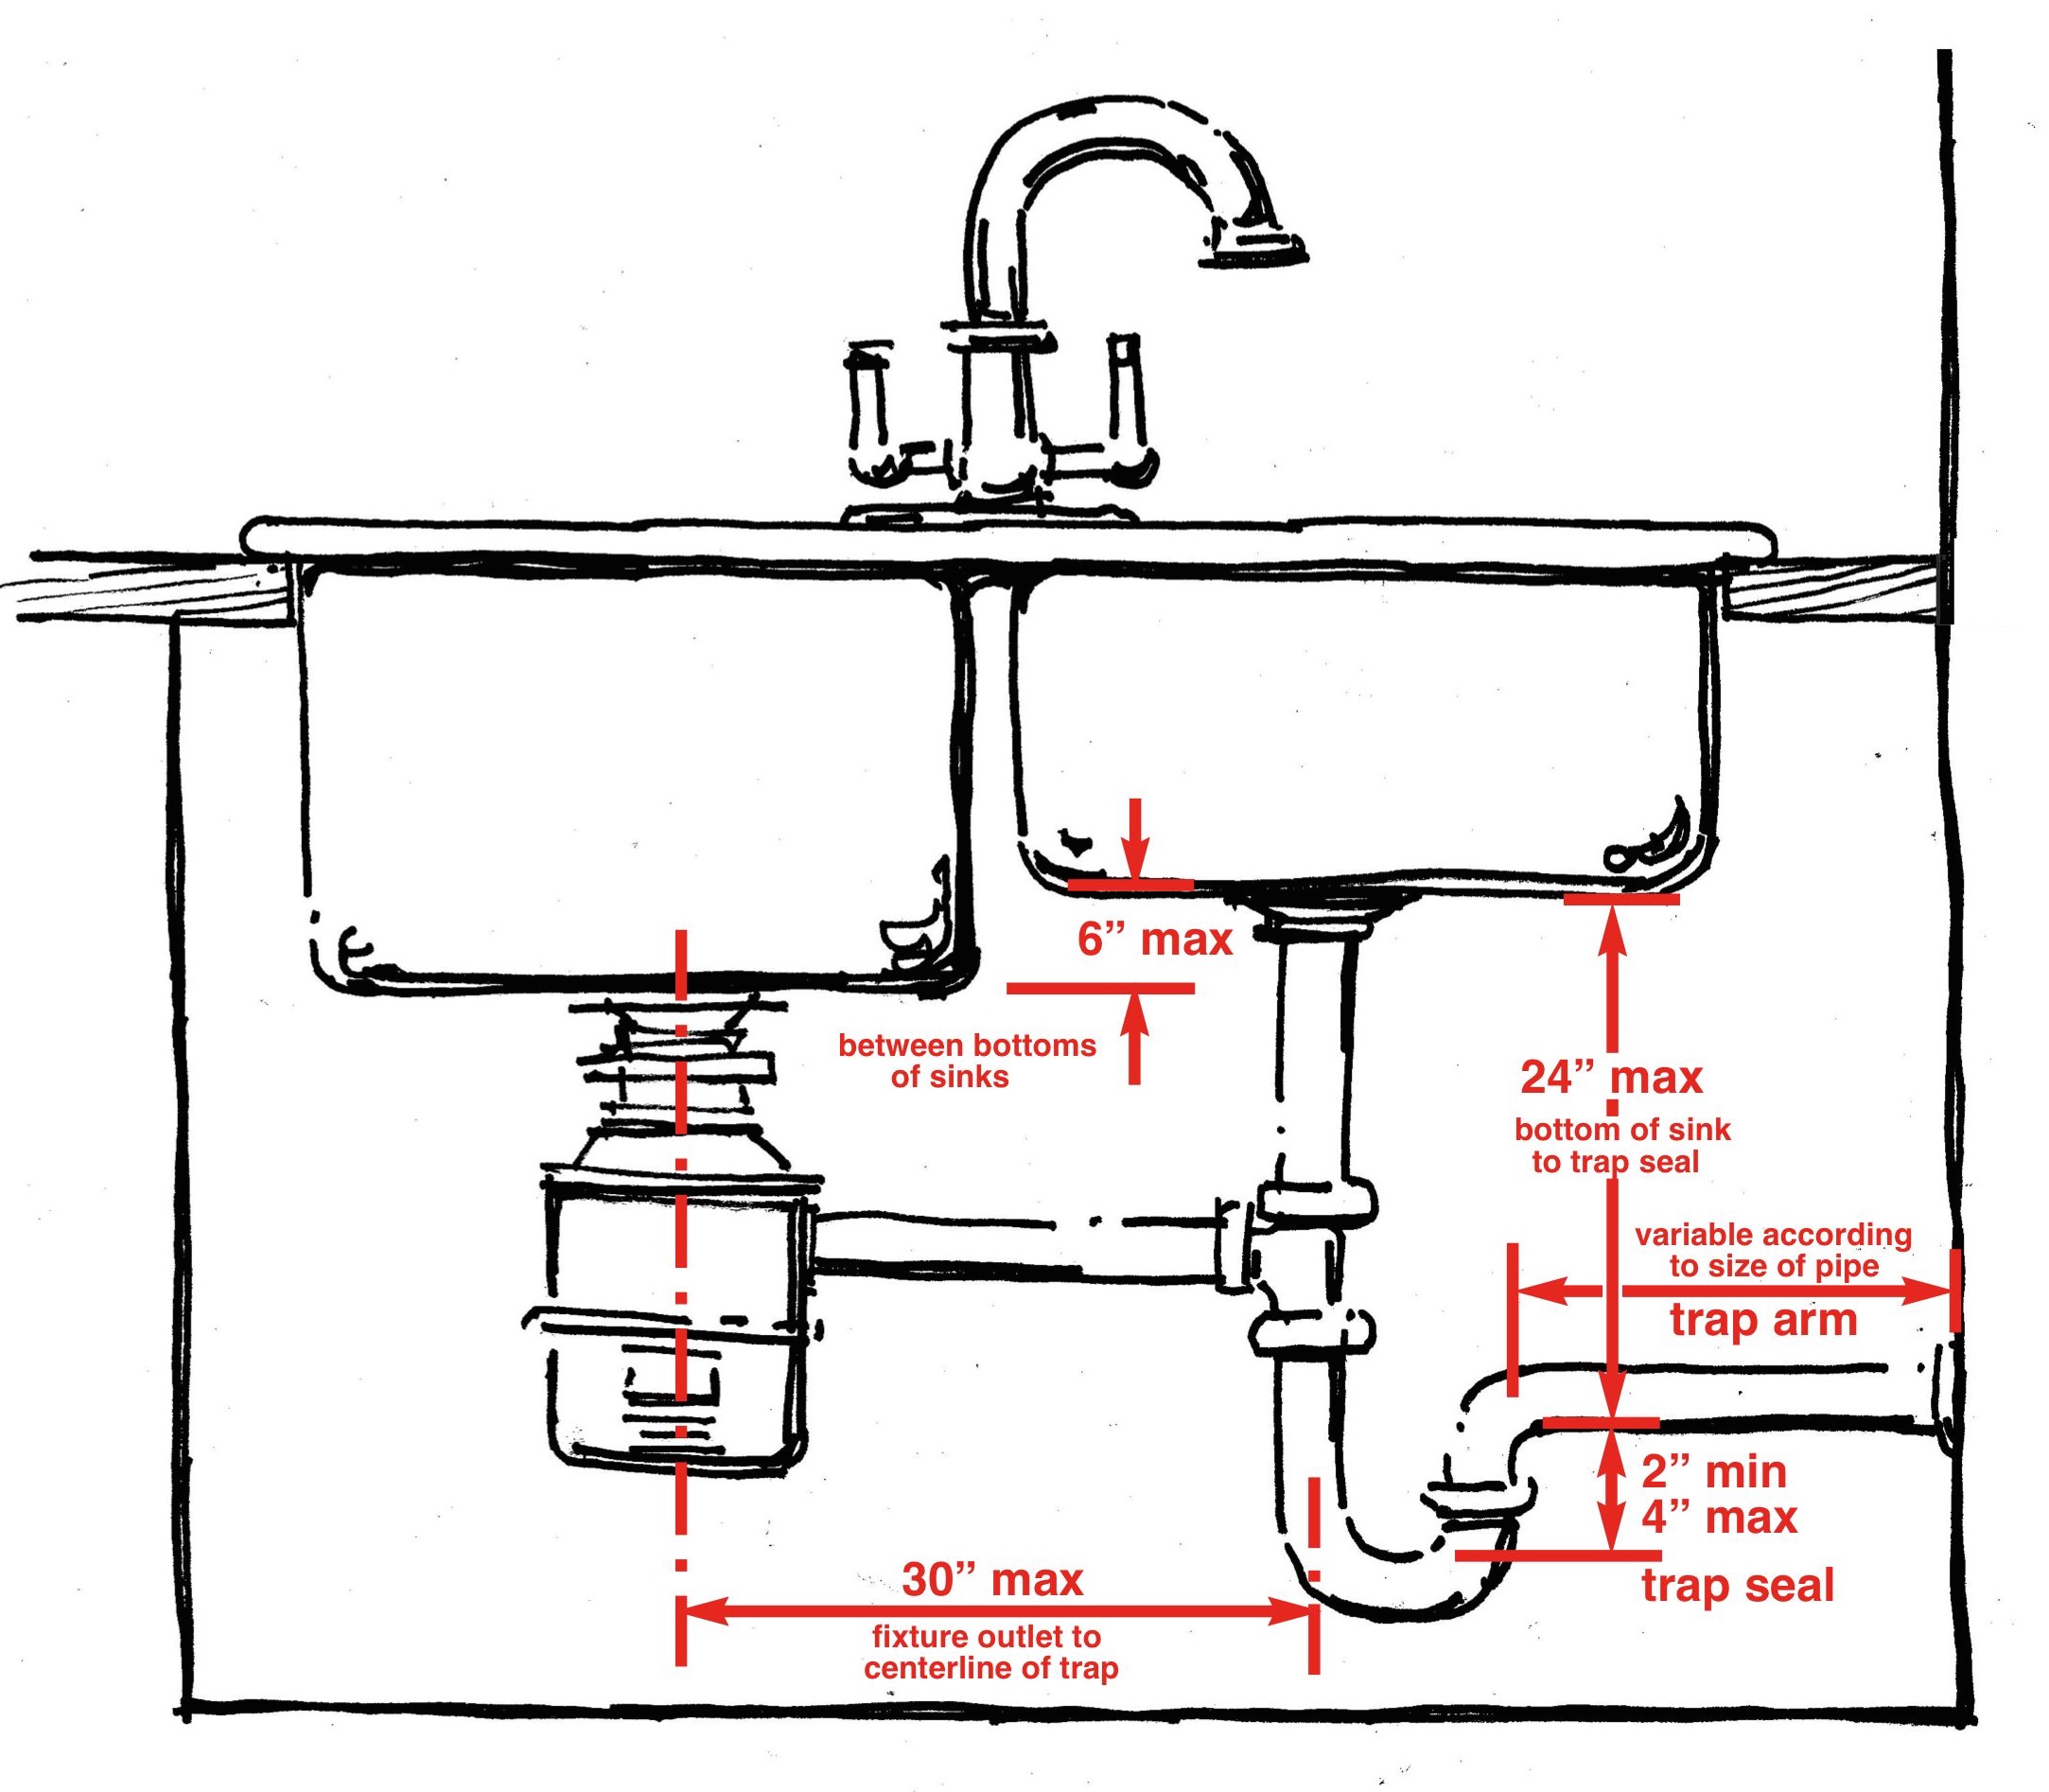 What Are The Code Requirements For Layout Of Drain Piping Under Sinks